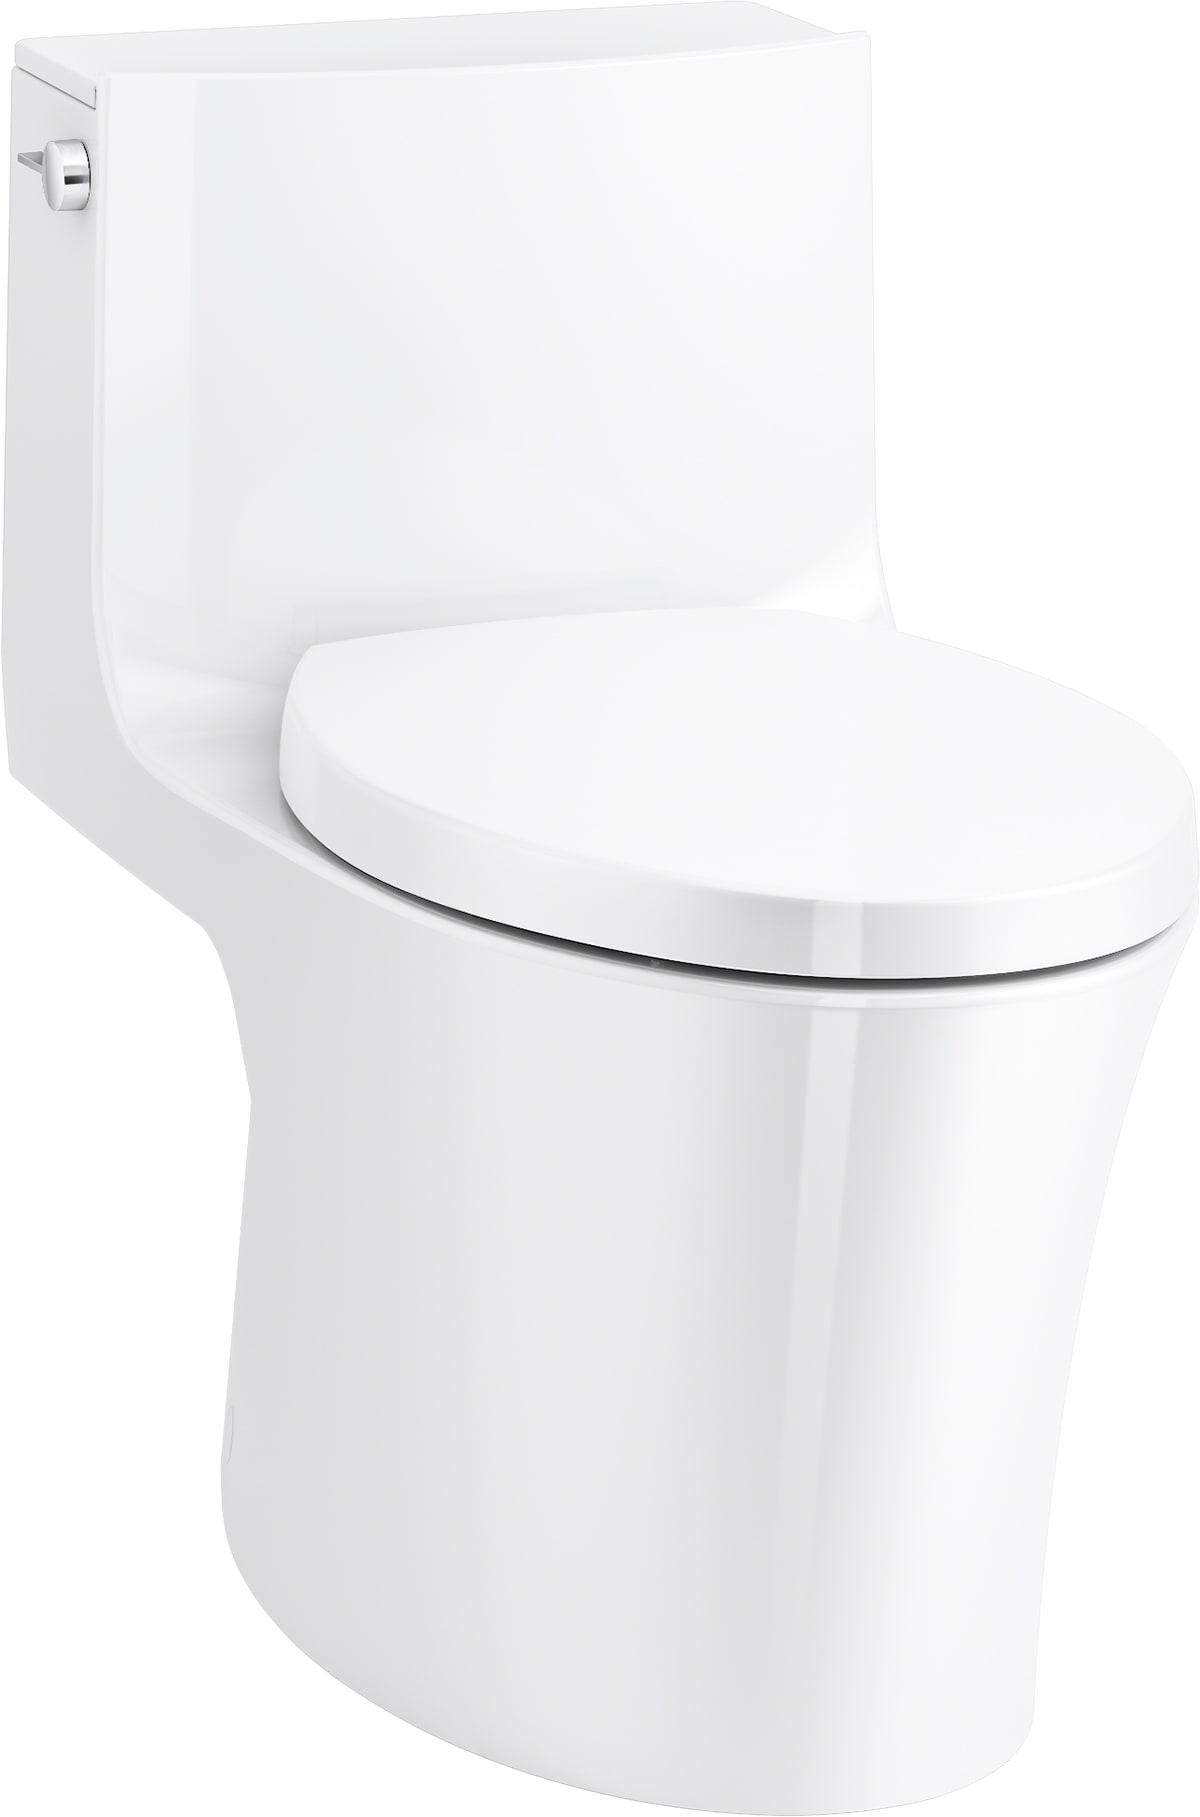 tumor tussen schedel Compact elongated Toilets at Lowes.com